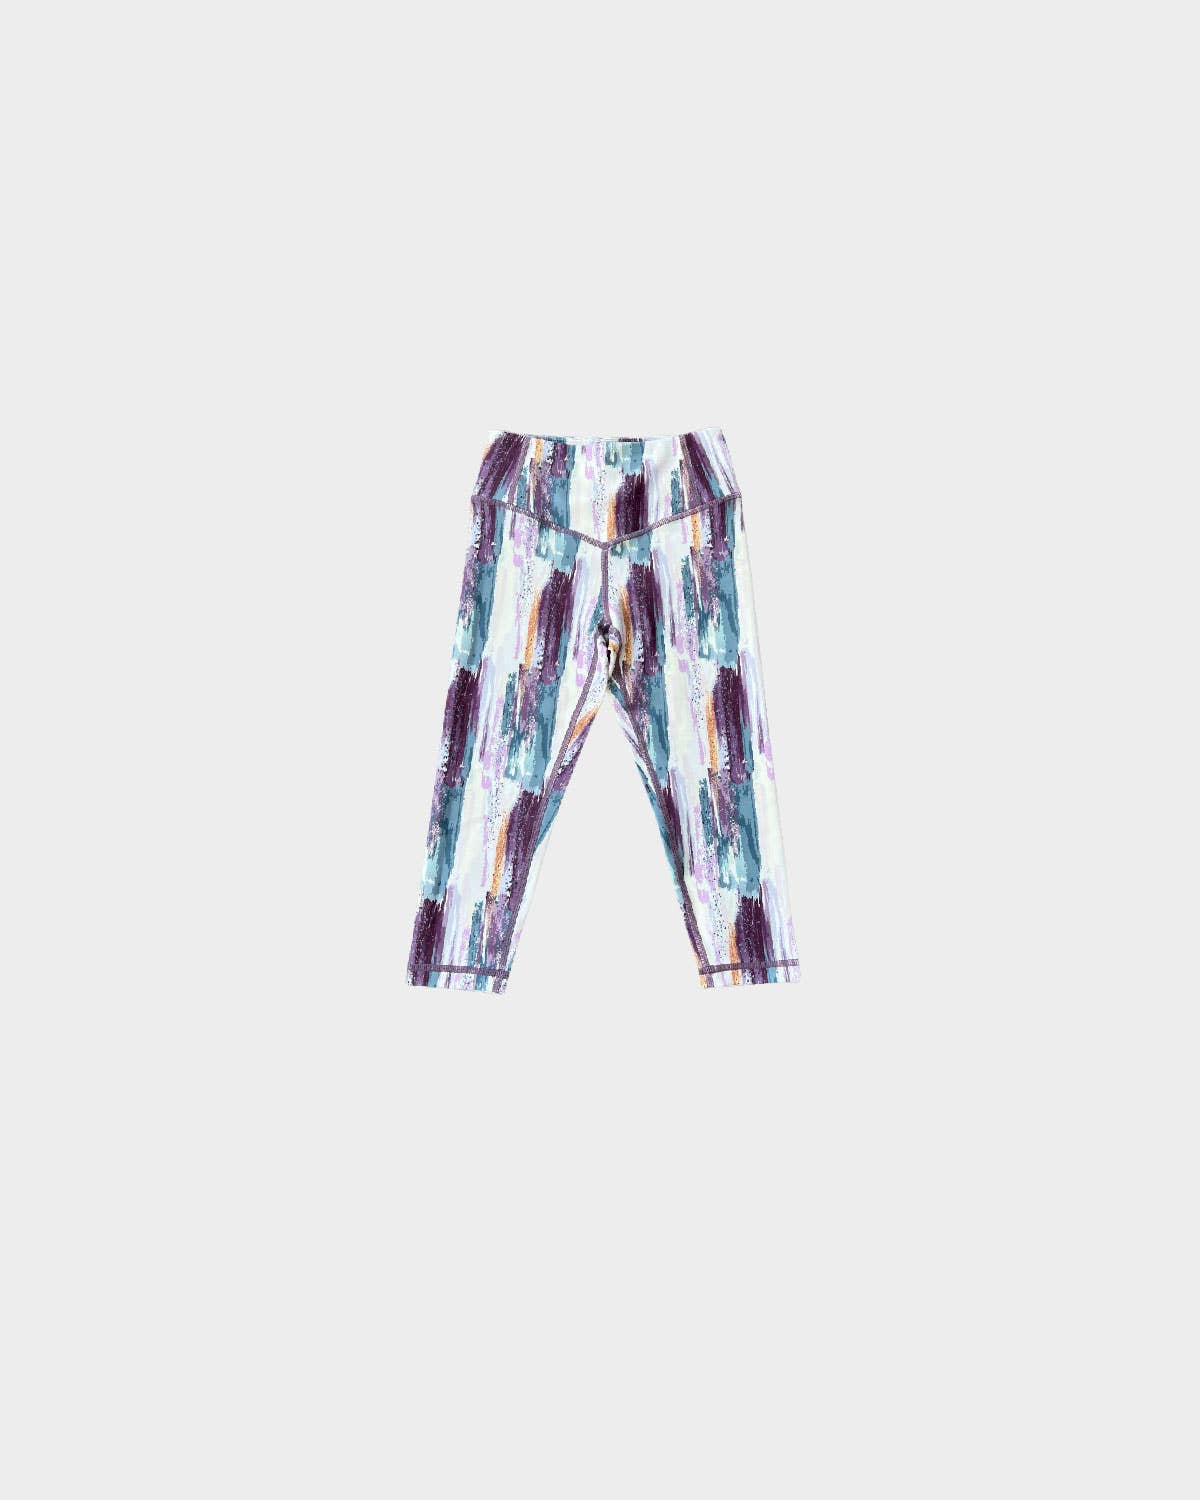 babysprouts clothing company - S24 D1: Athletic Capri Leggings in Grape Sparkle